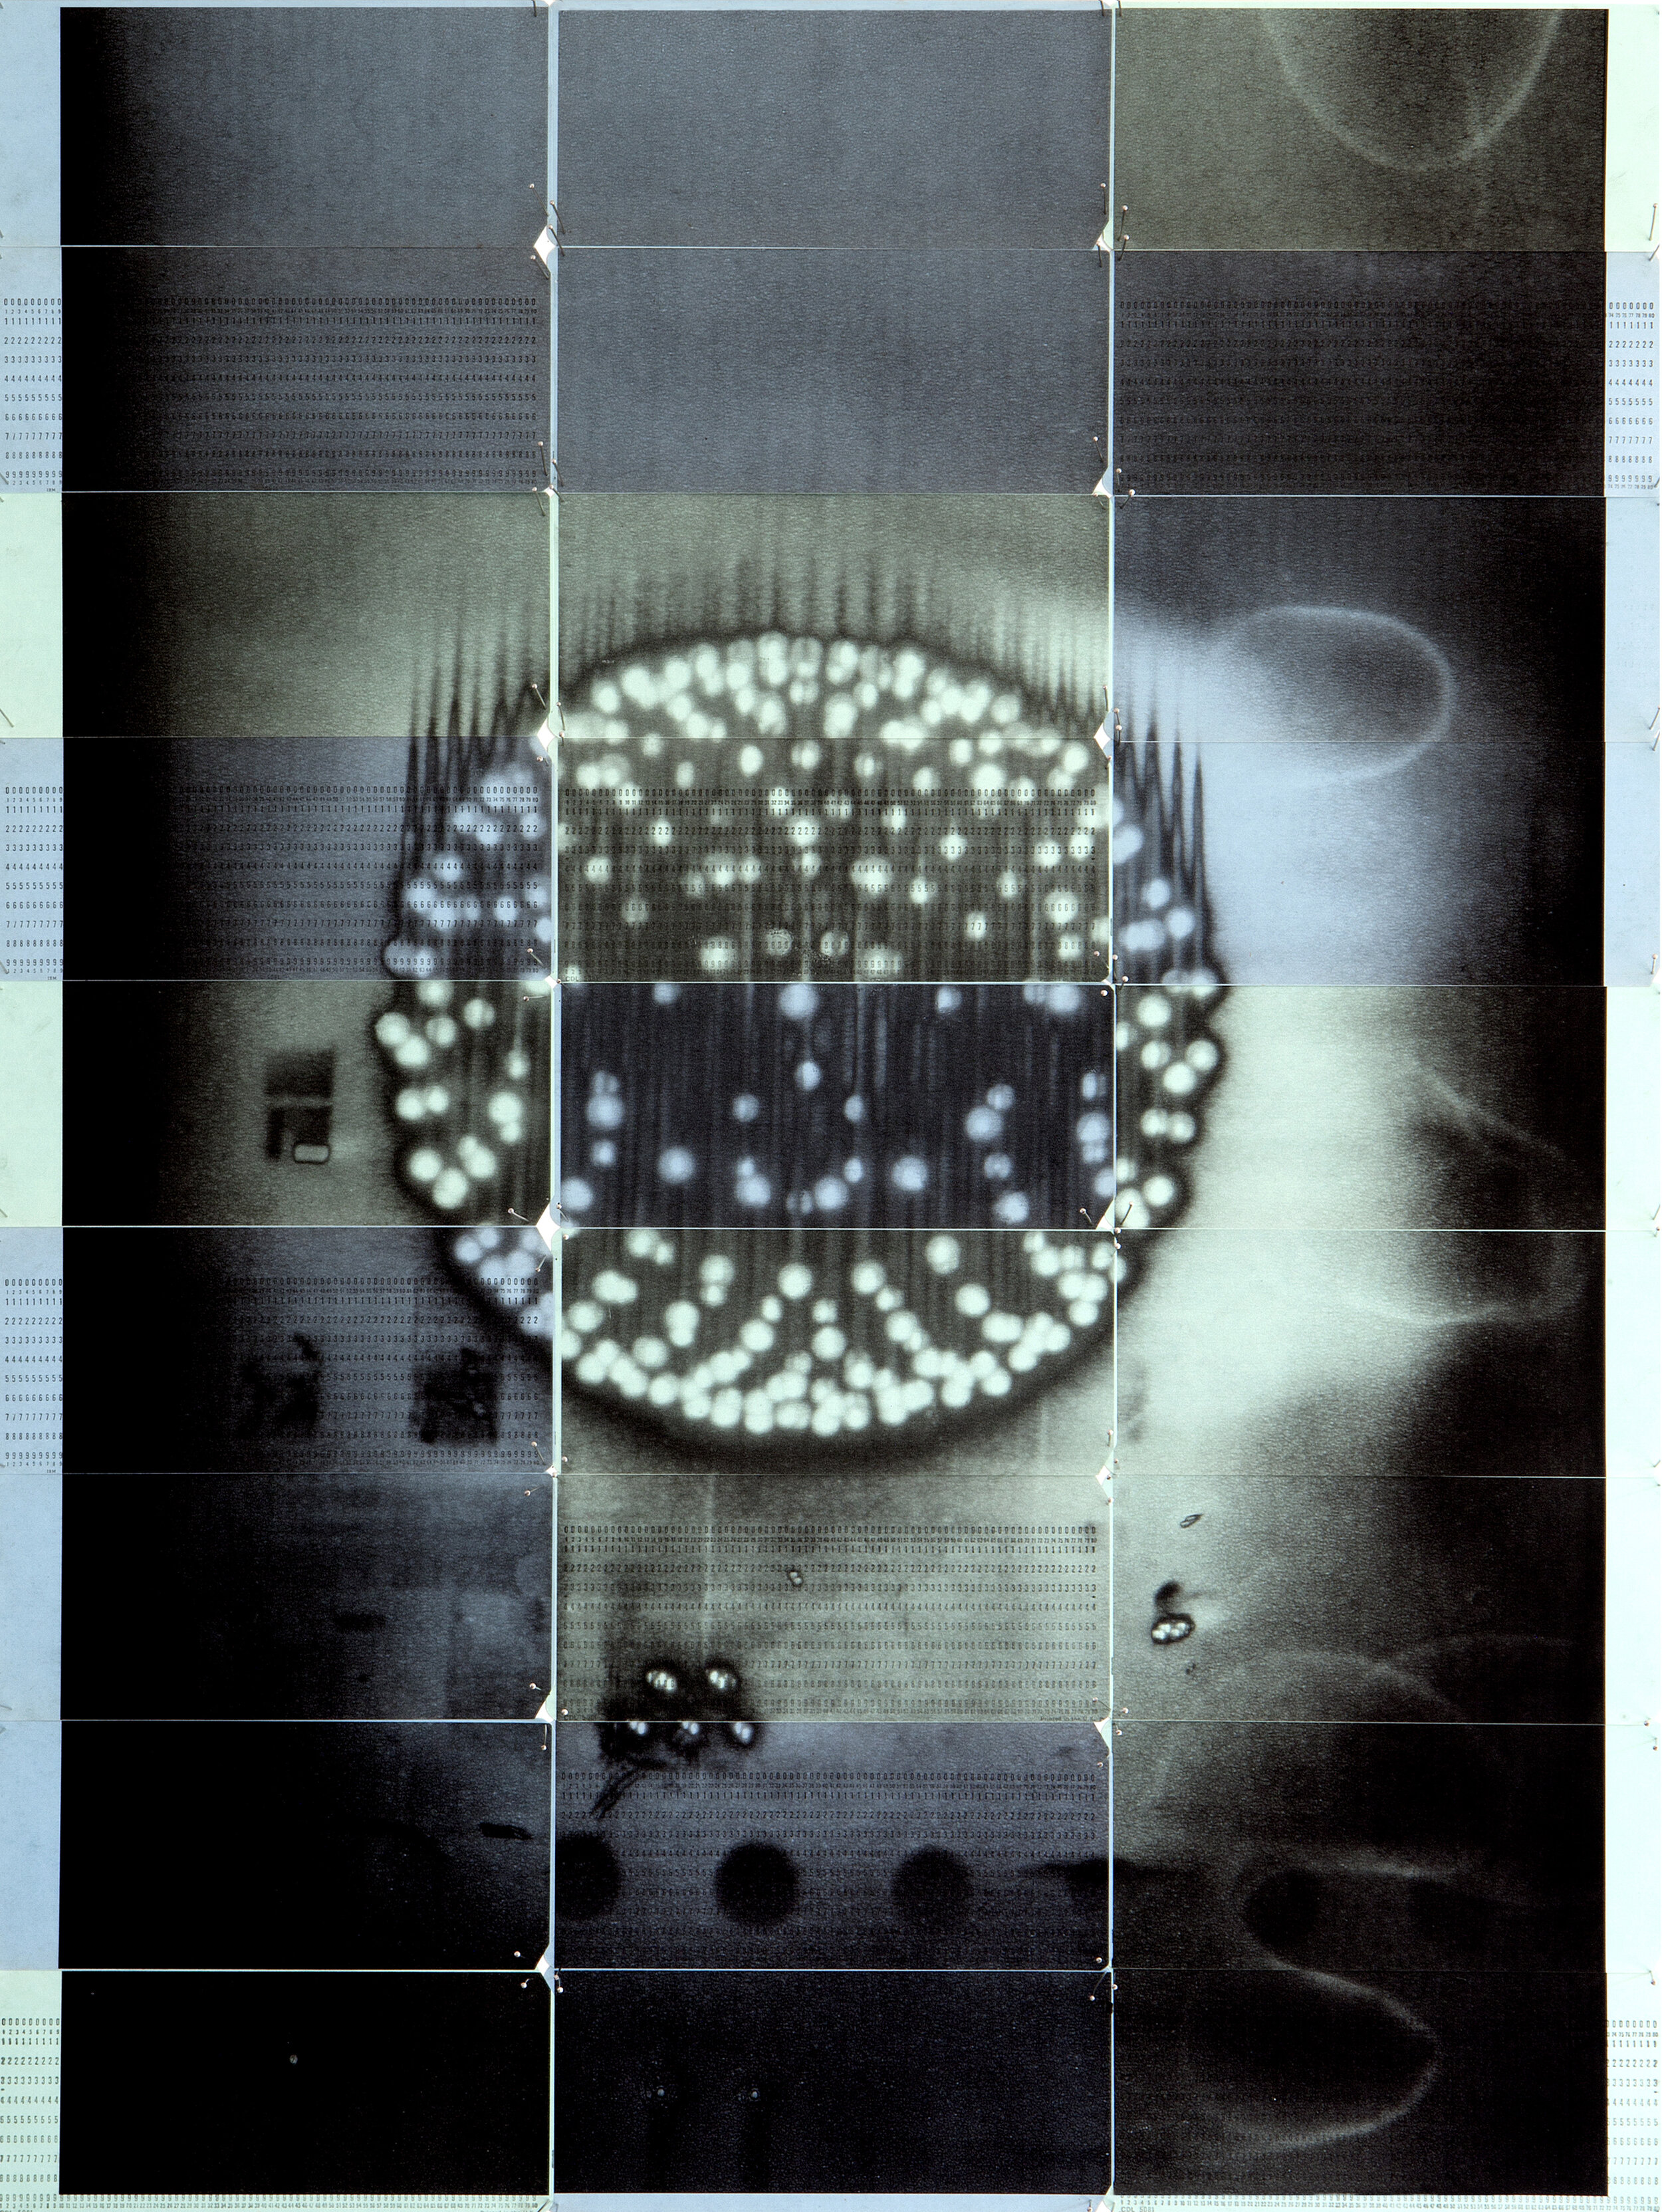 LDN5_51, 2017 Inkjet on 27 green and blue computer punch cards Negative date 2017 74.7 x 56.1 cm.jpg